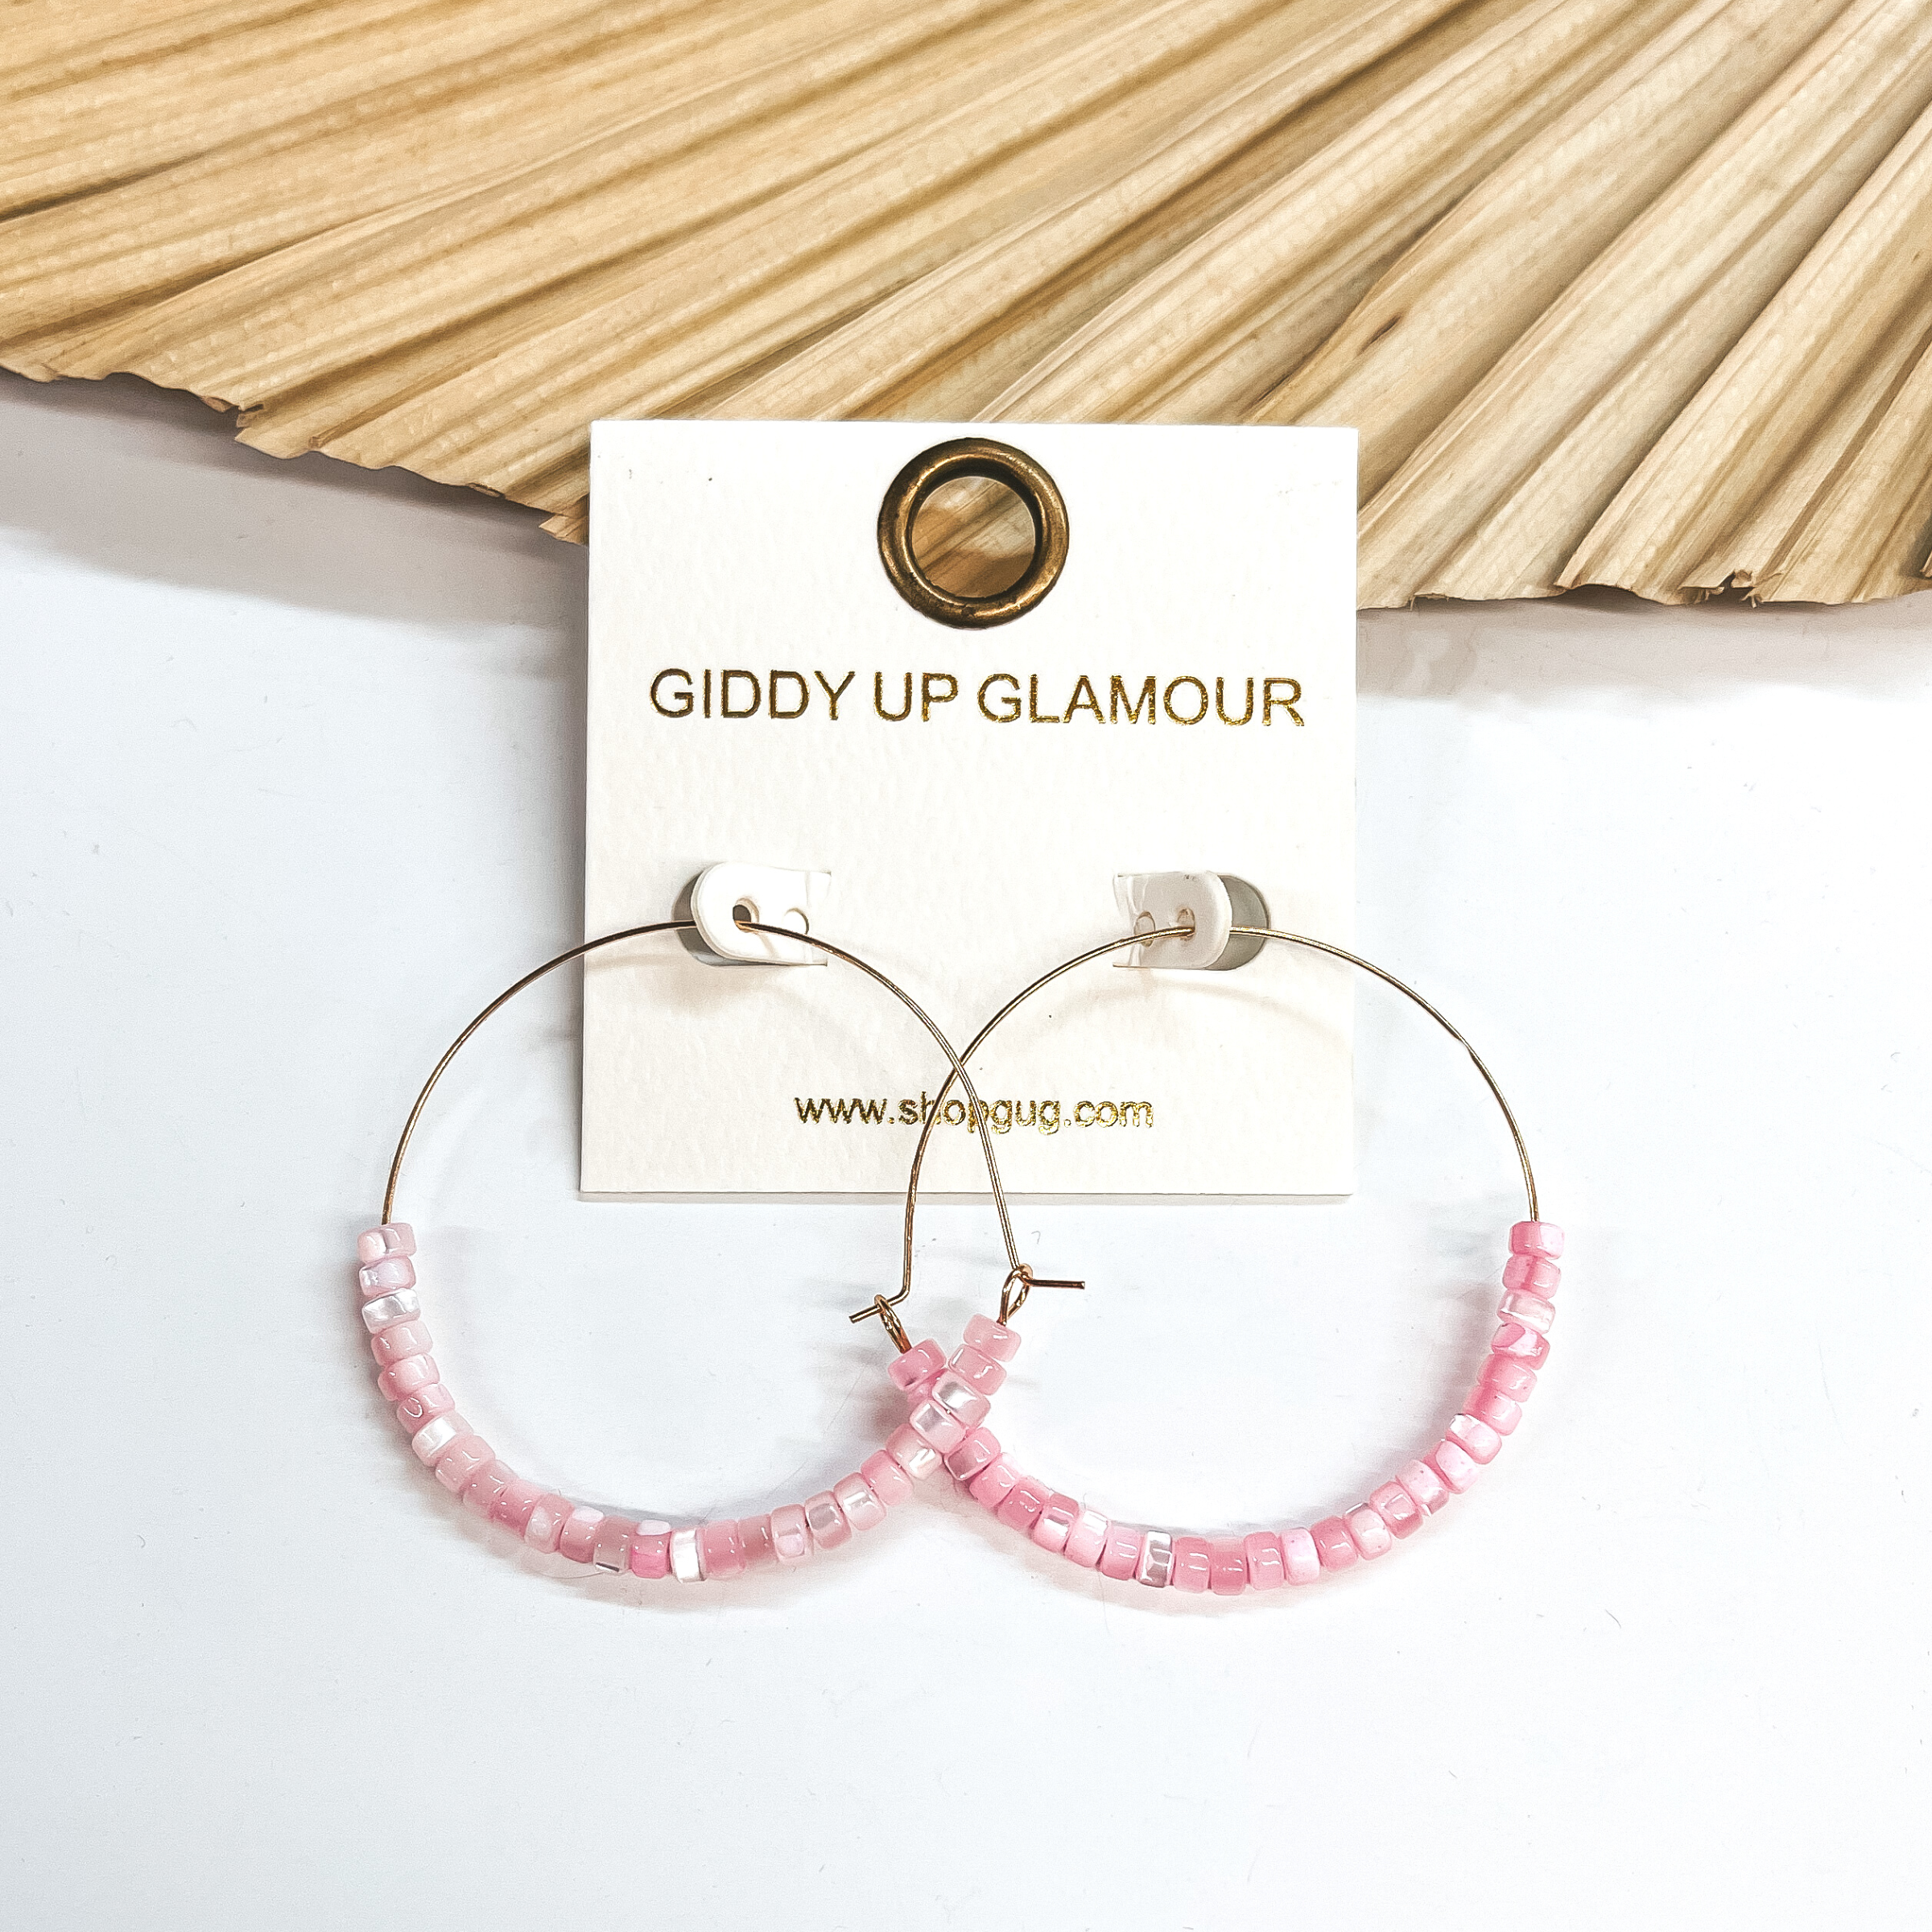 These are thin wire gold hoops with mother of pearl  beads in pink. The beads are in the bottom half of  the  earrings. These earrings are taken leaning up  against a dried up palm leaf and white background.